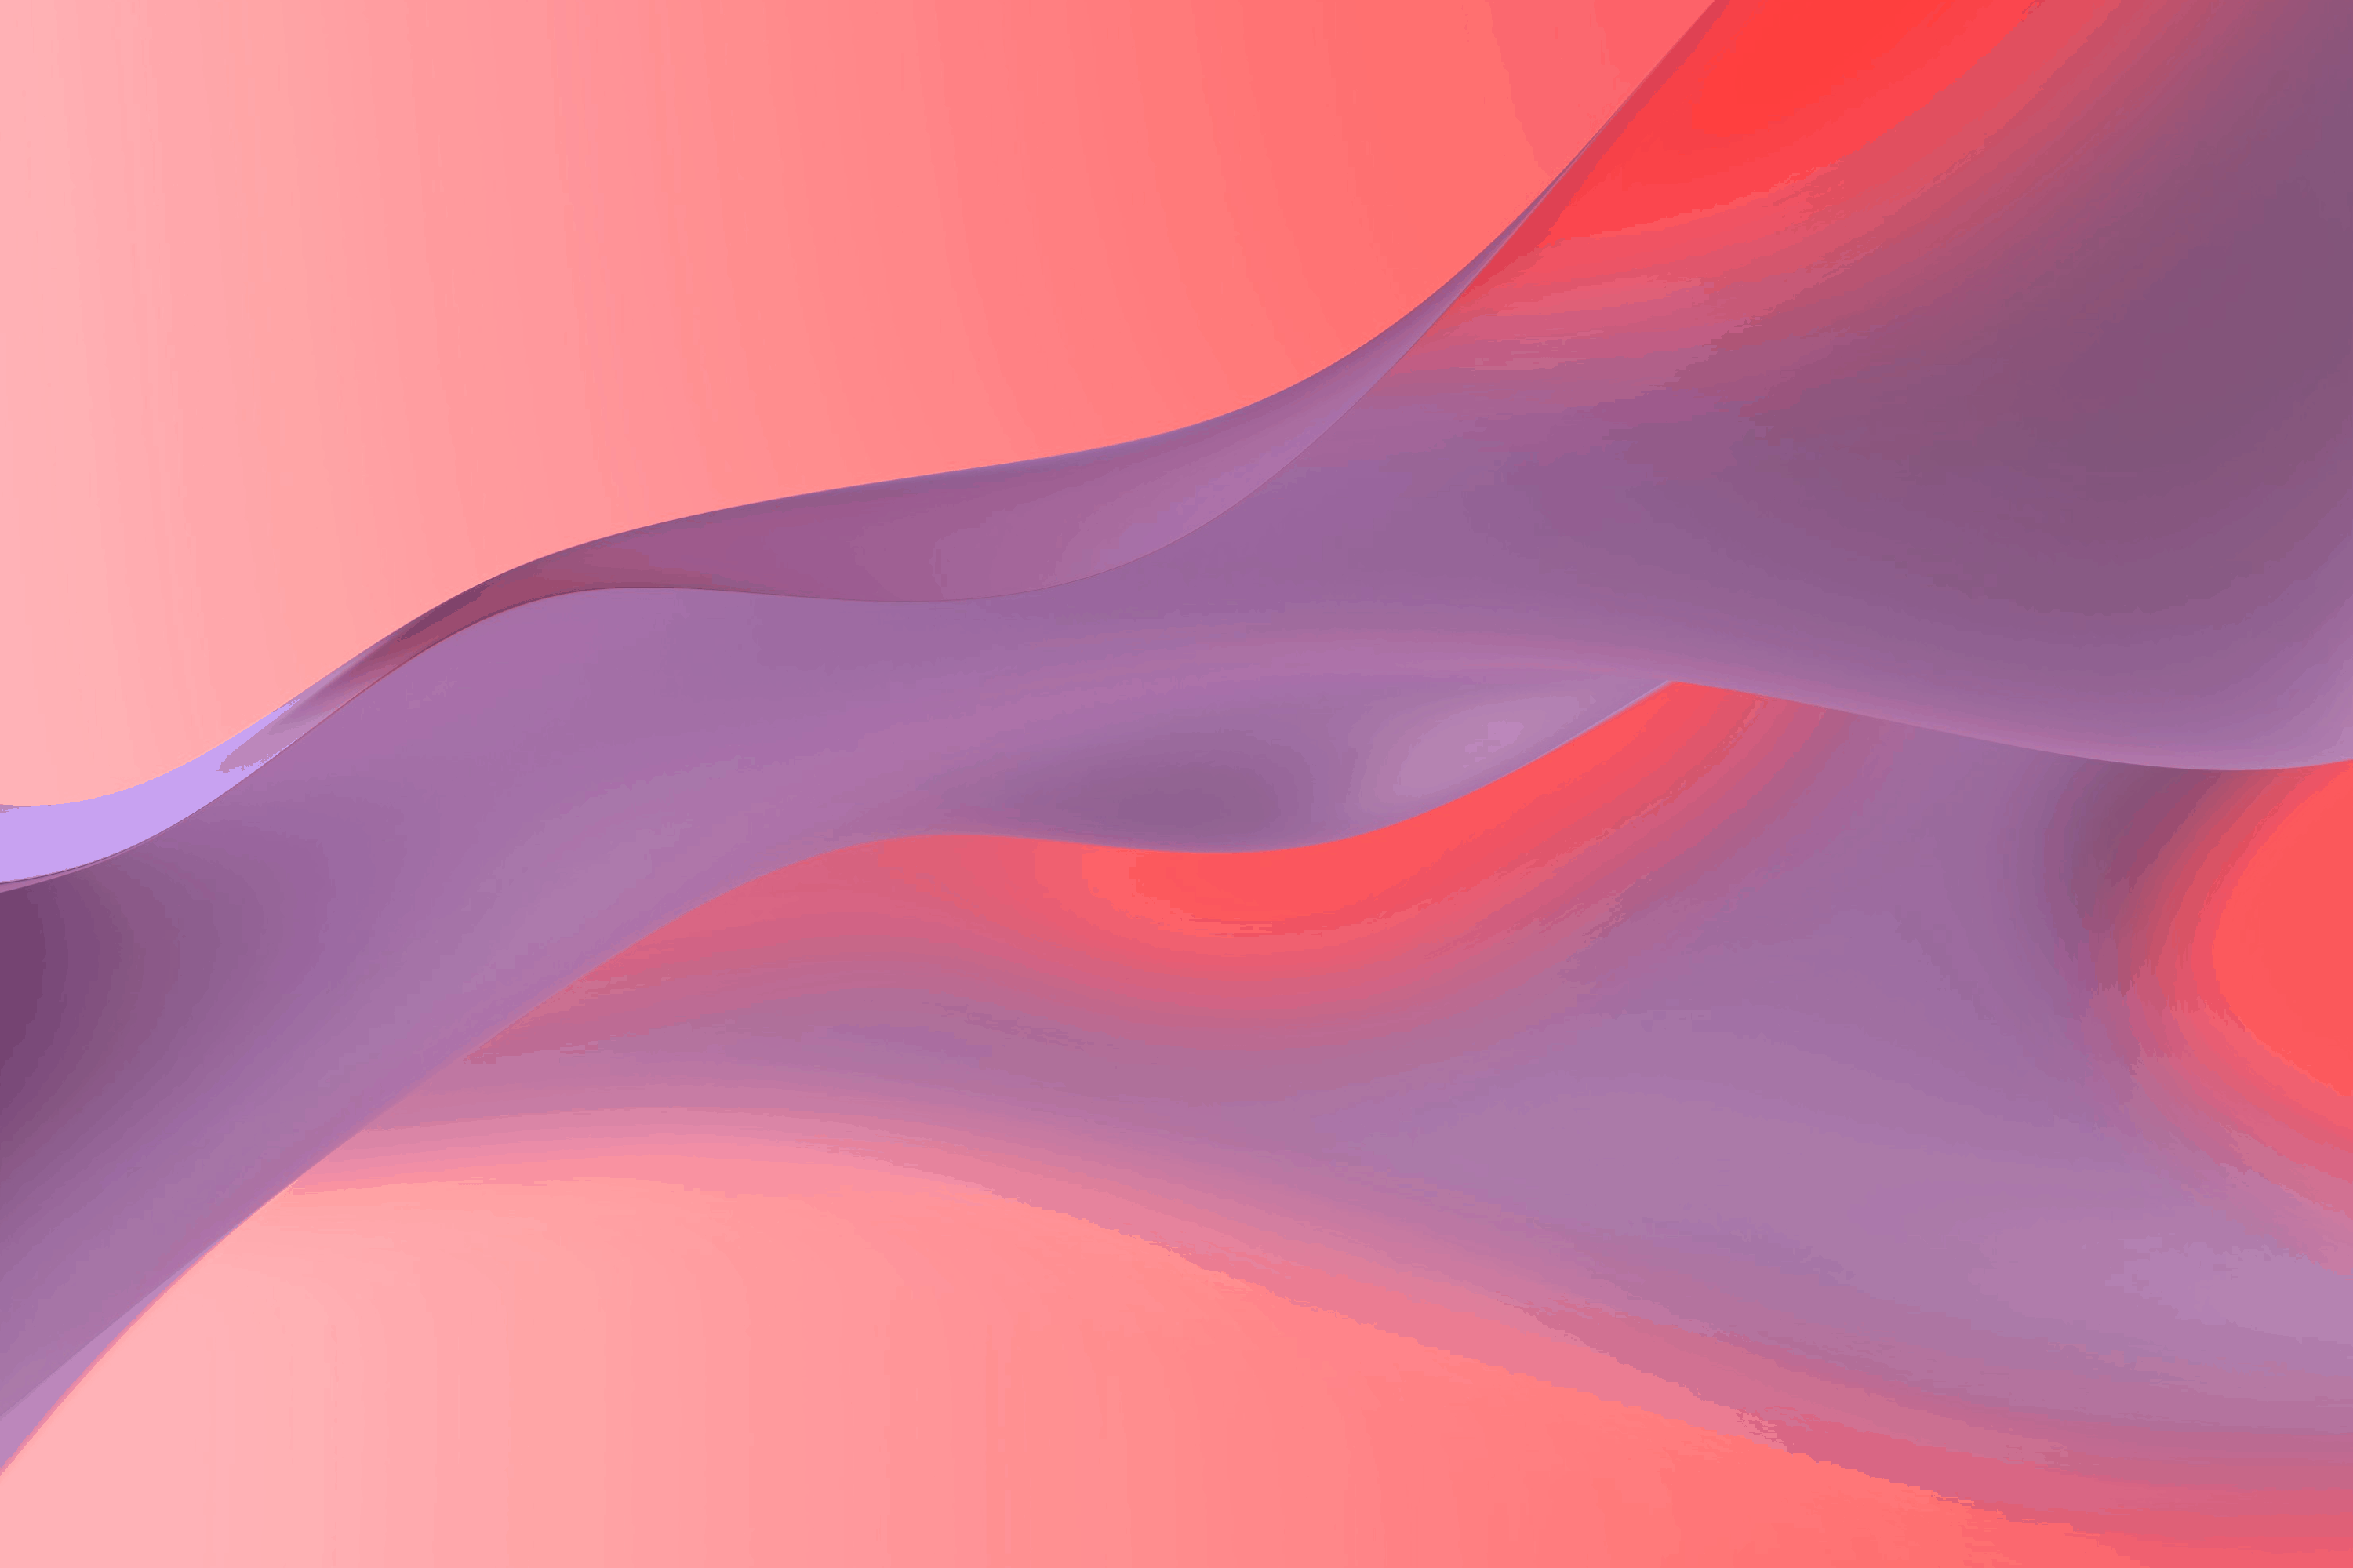 A purple and pink abstract art - Chromebook